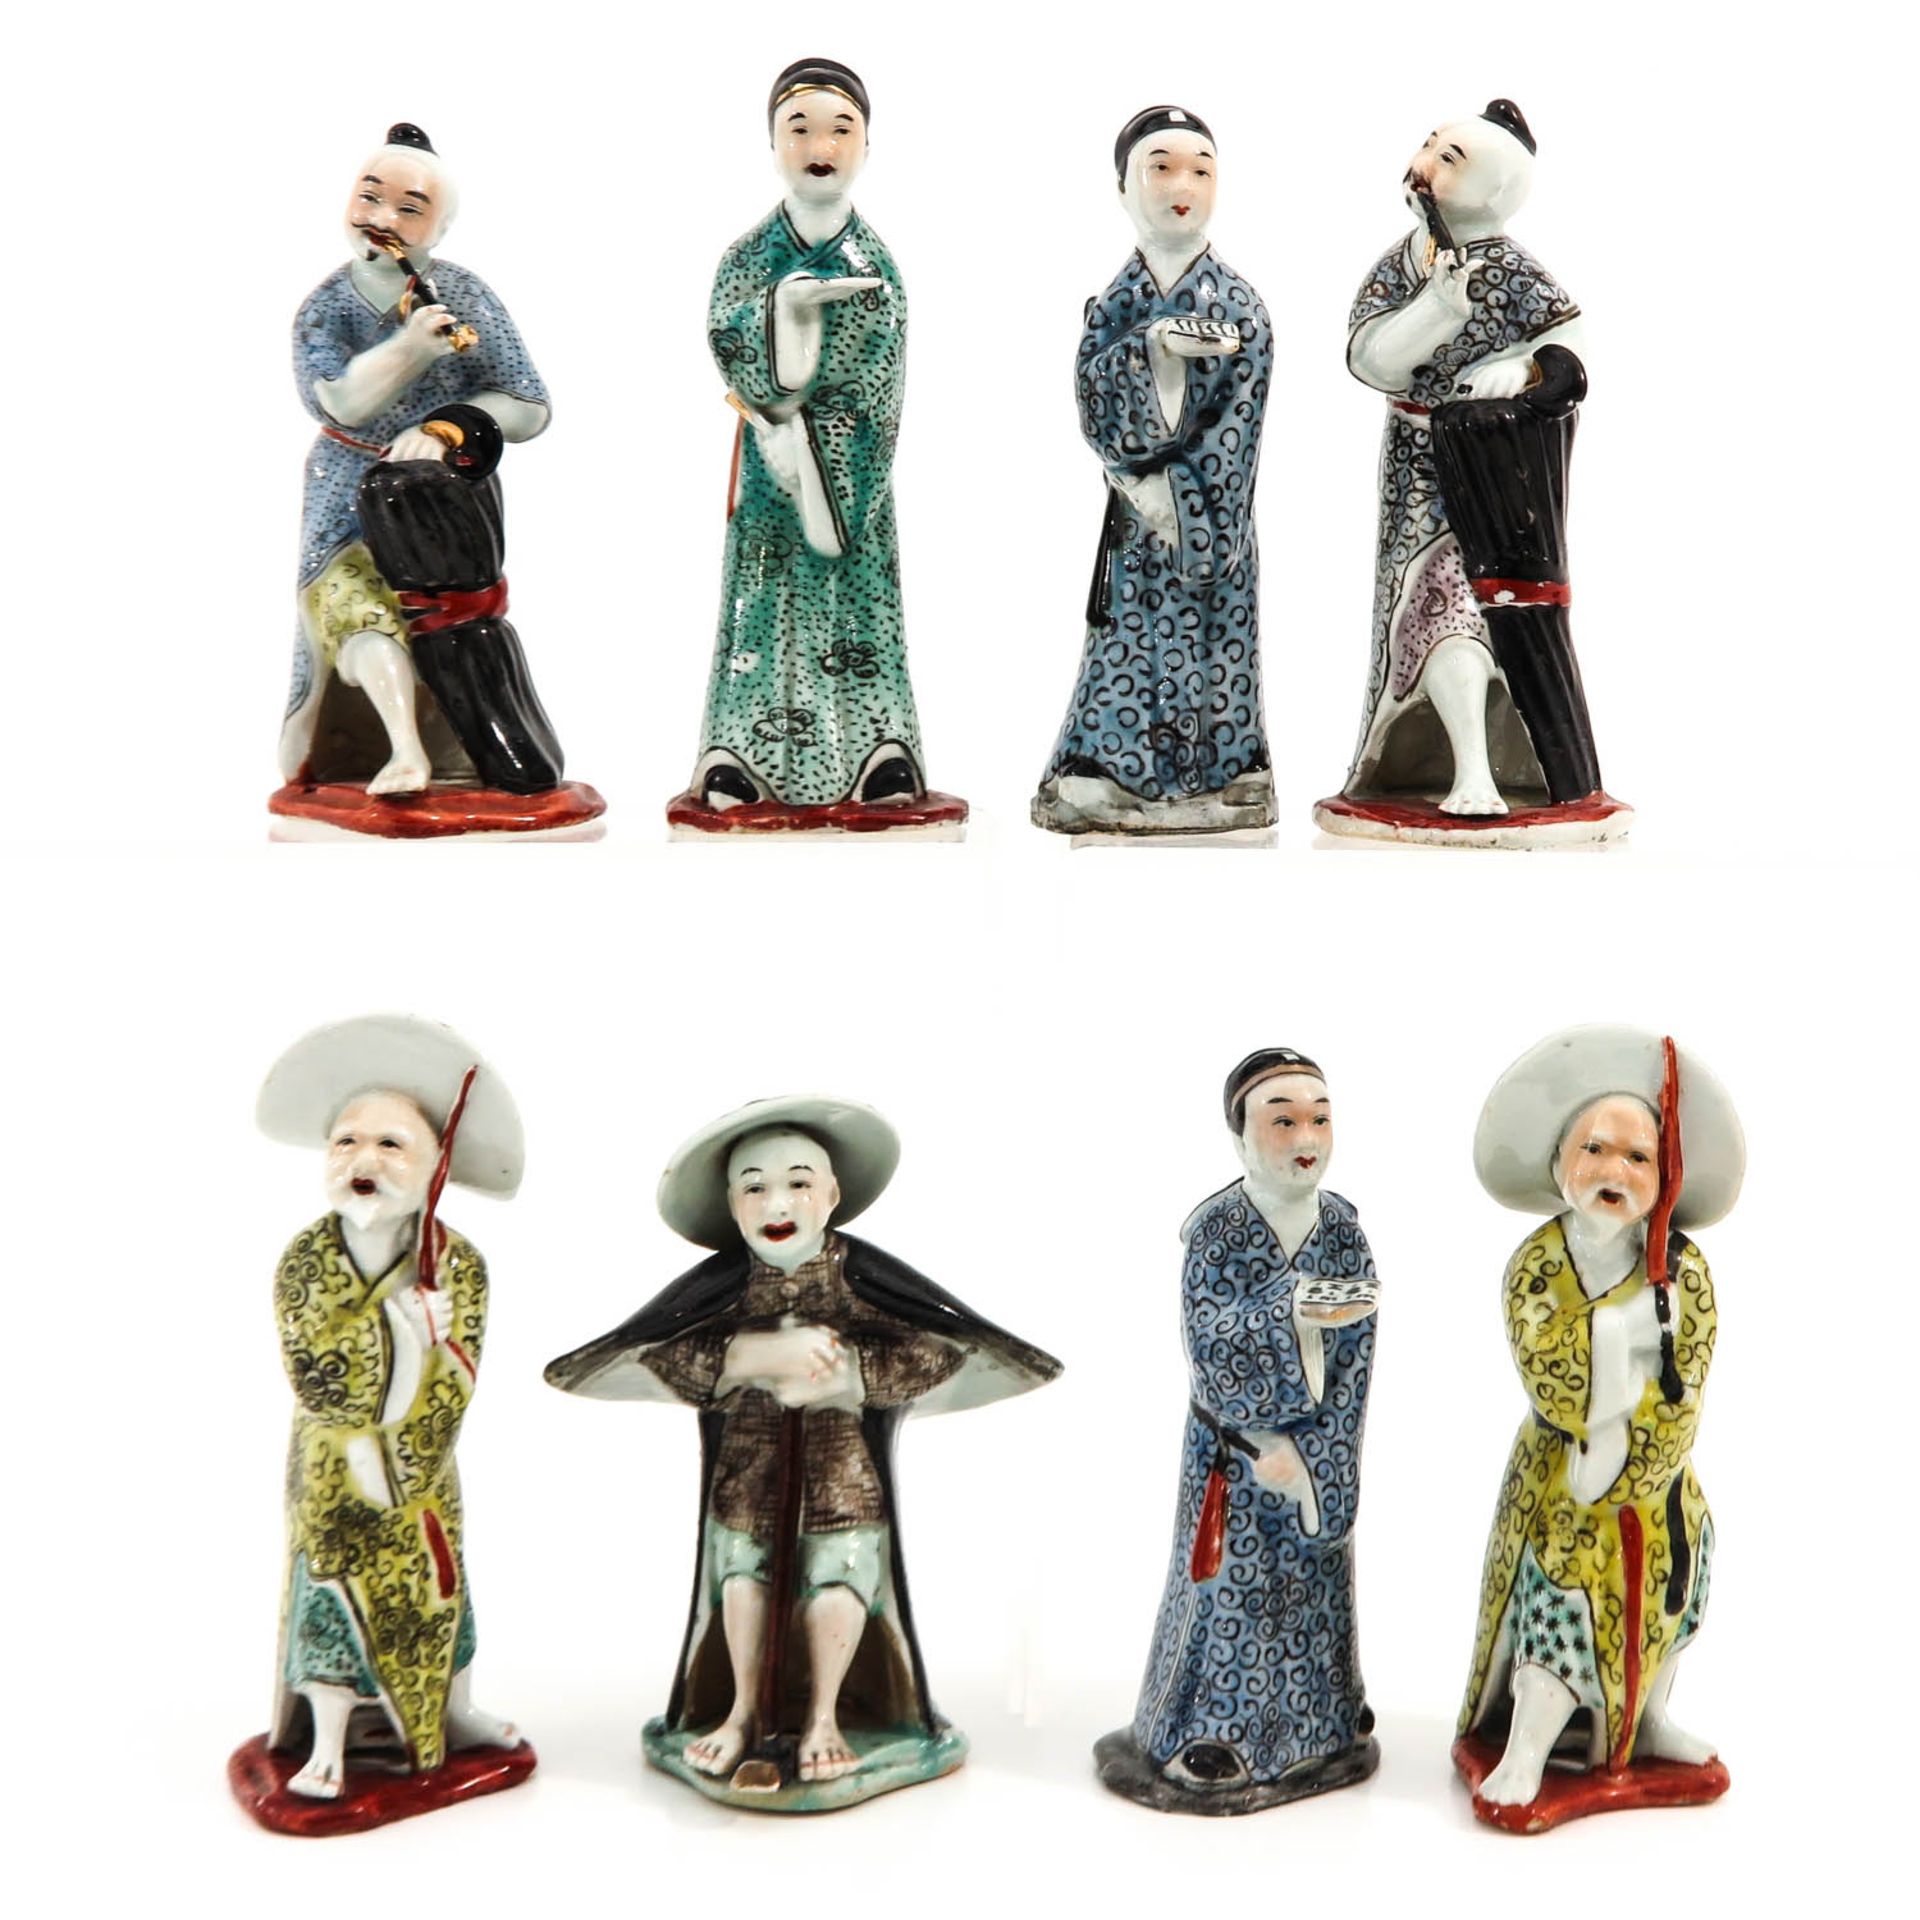 A Collection of 8 Chinese Sculptures